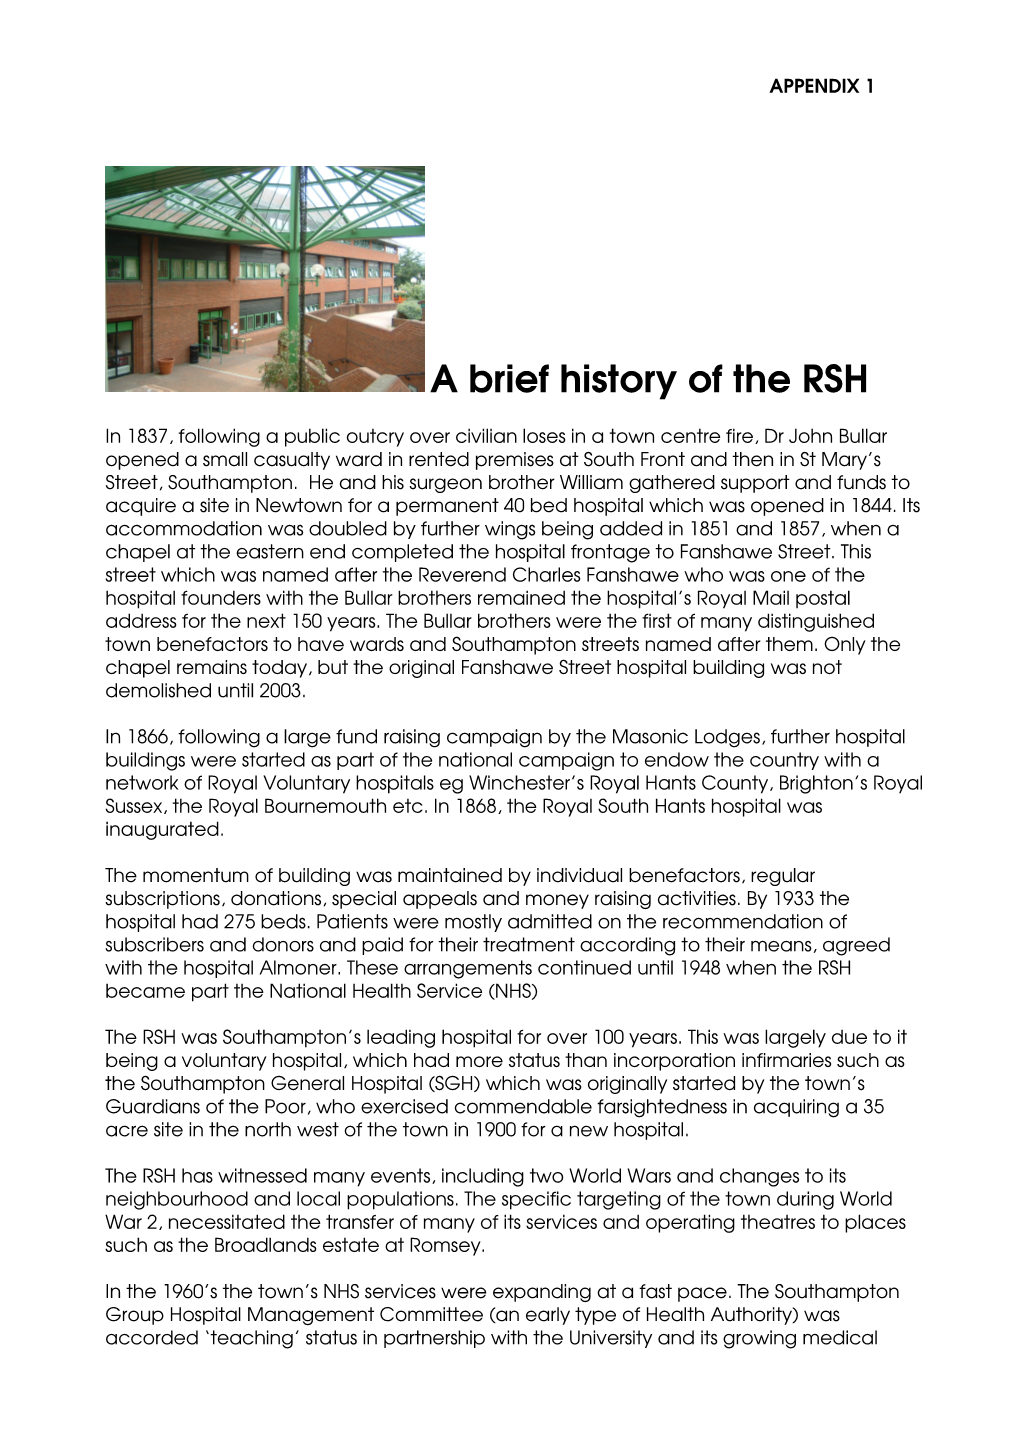 A Brief History of the RSH